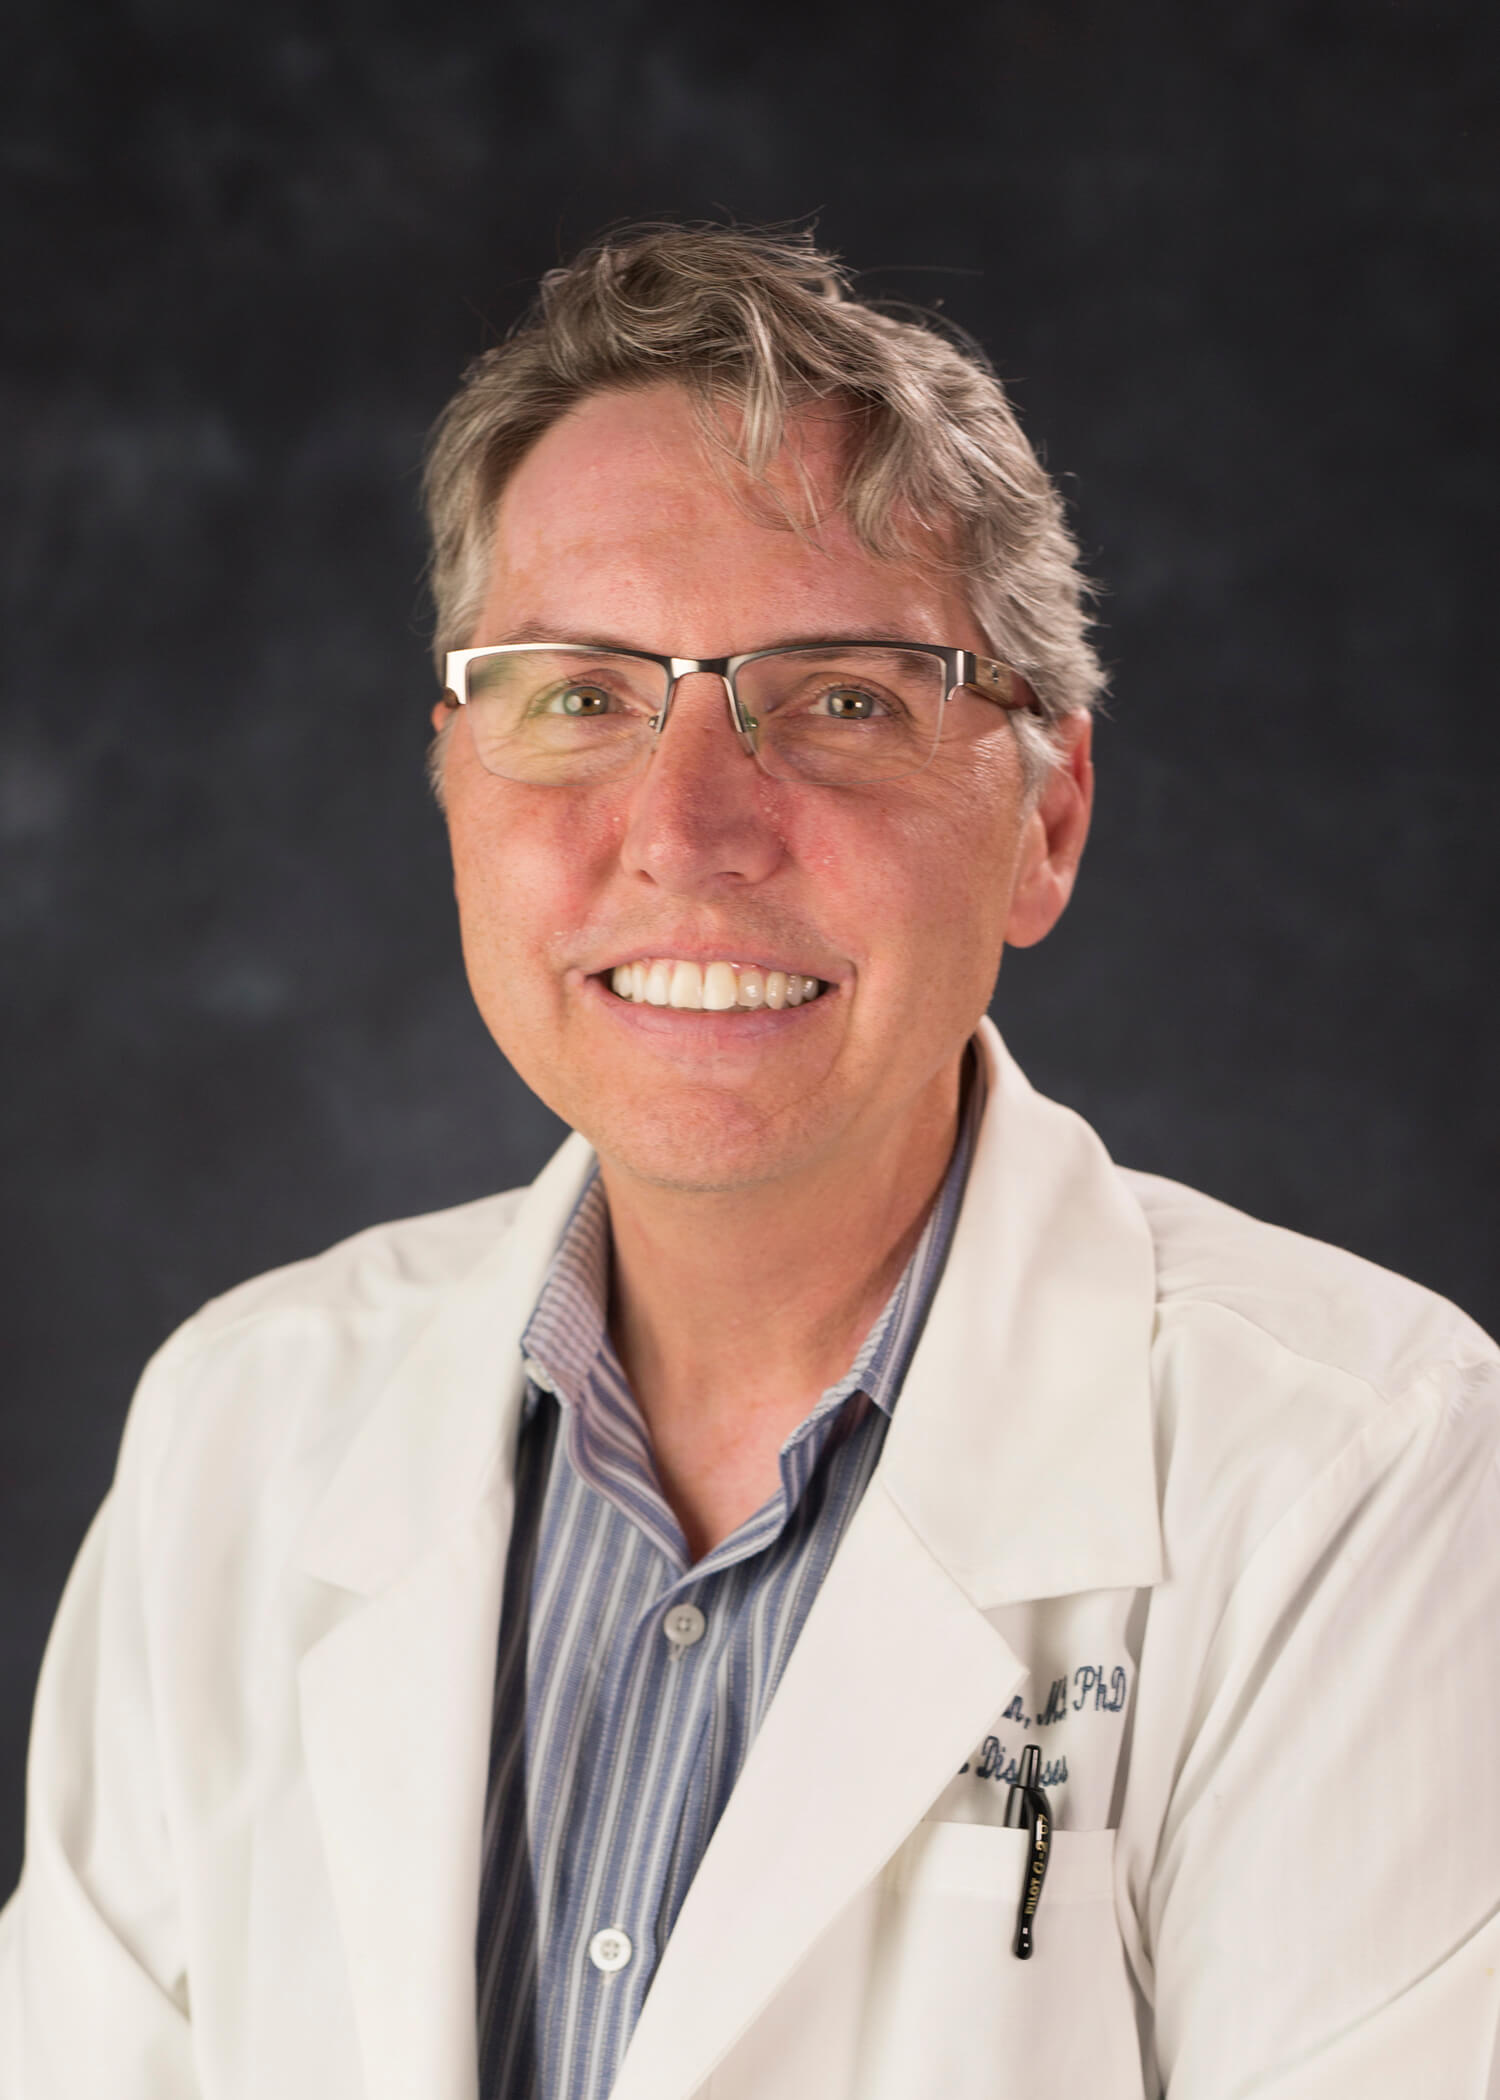 Photo of Jonathan Moorman, MD, PhD, FACP ProfessorVice Chair of Research and Scholarship, Vice Chair of Education, 